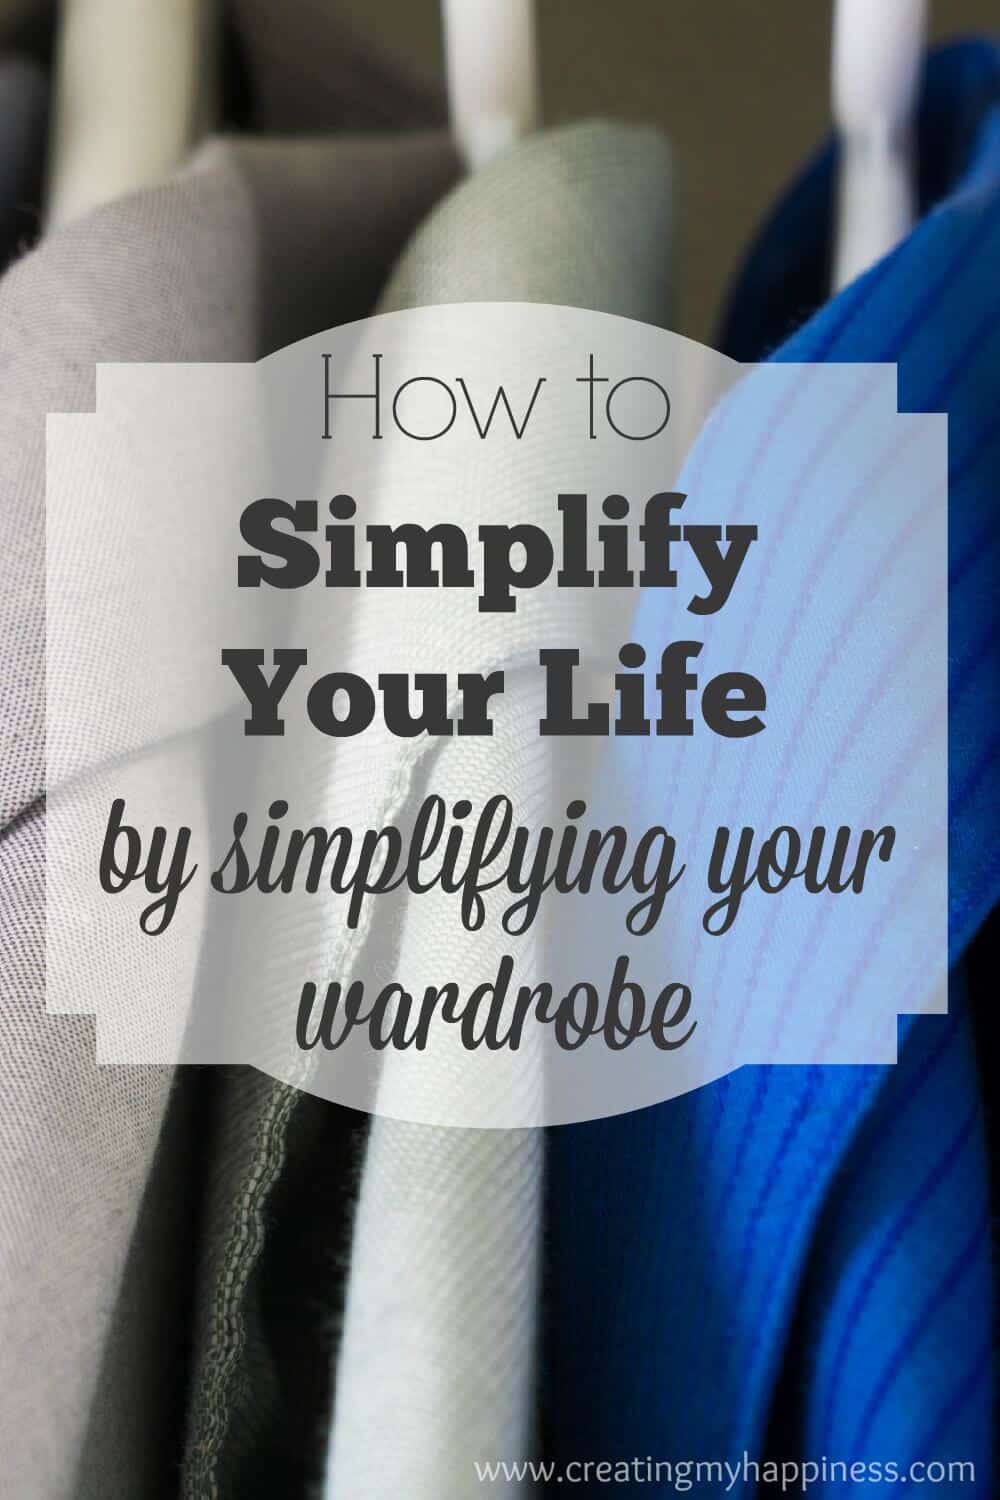 Are you searching for ways to simplify your life? Why not start with something you do every day - getting dressed!